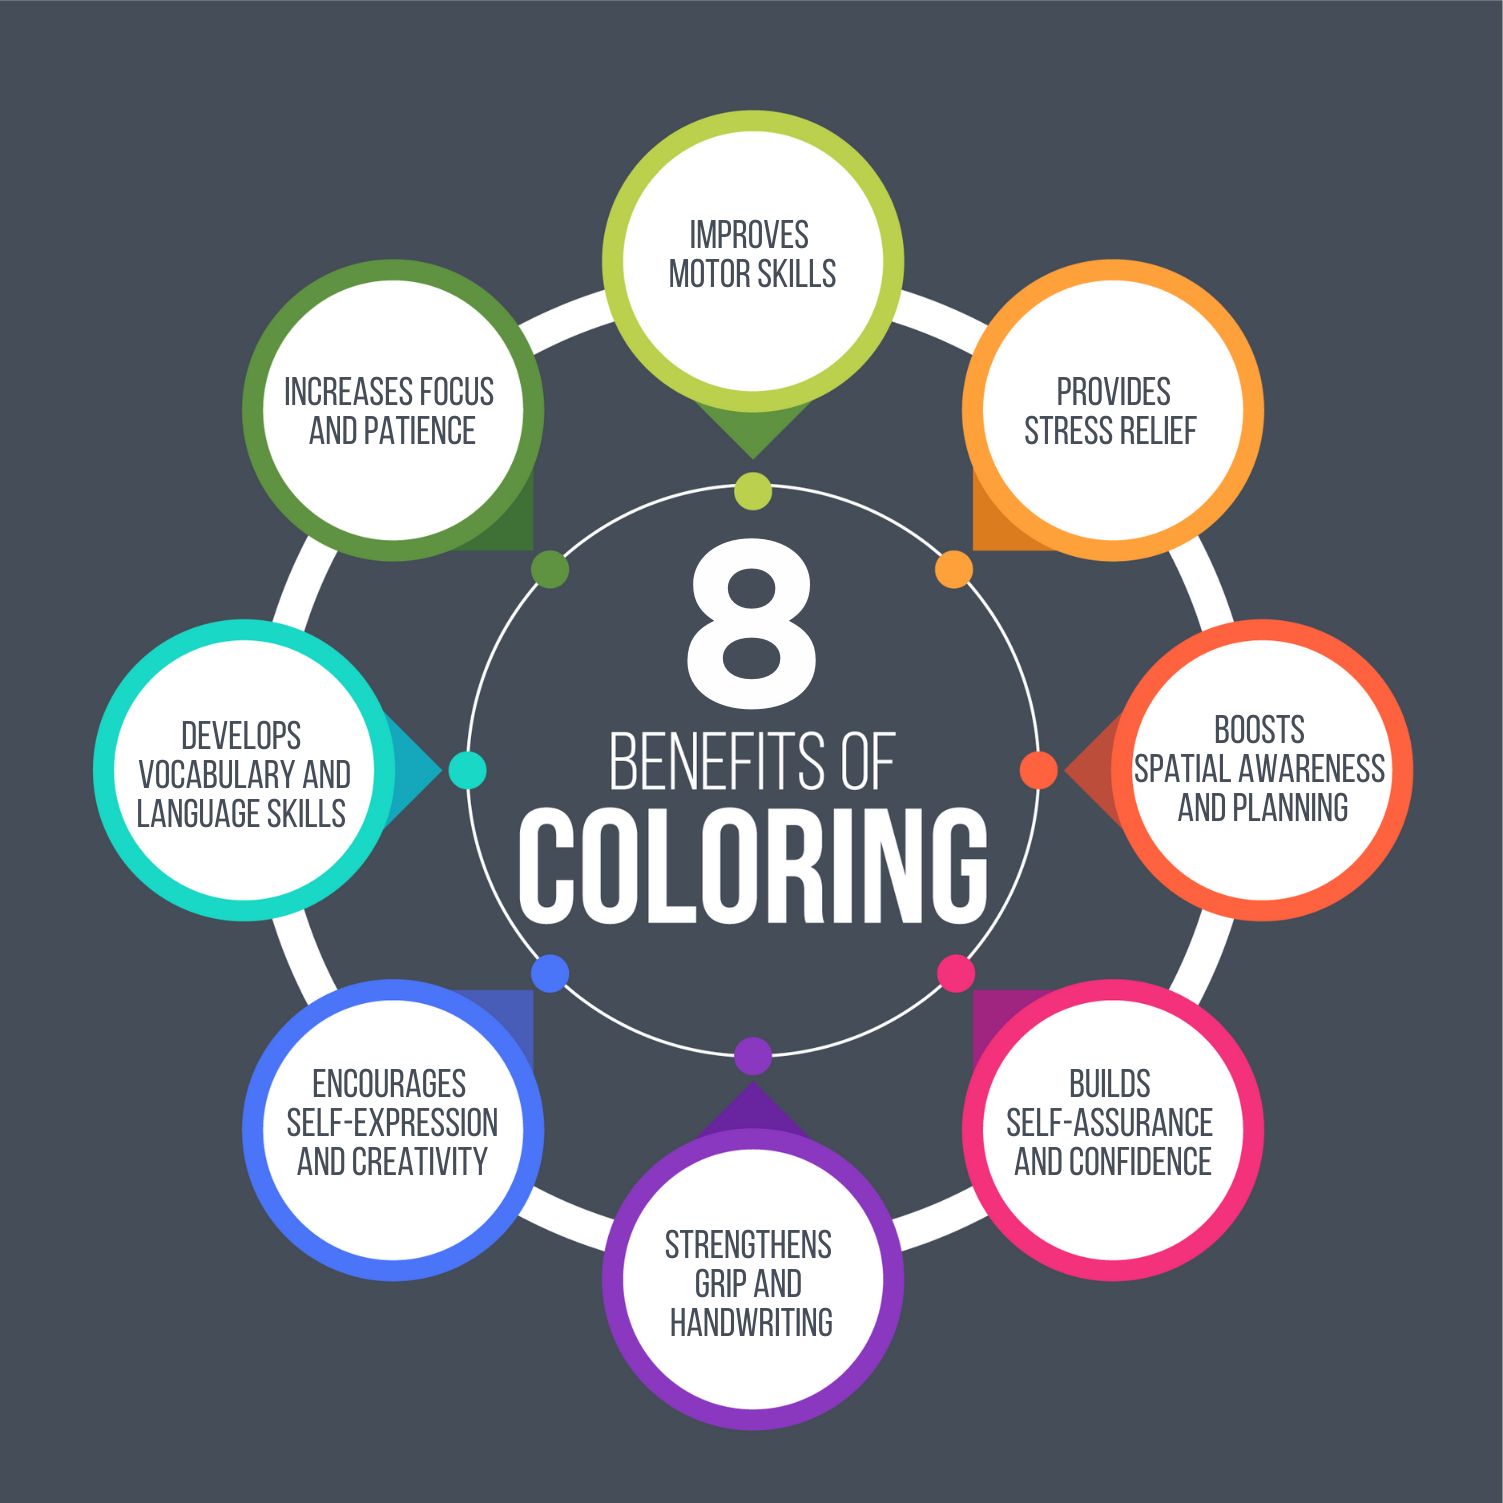 I. Introduction to Coloring and its Physical Benefits